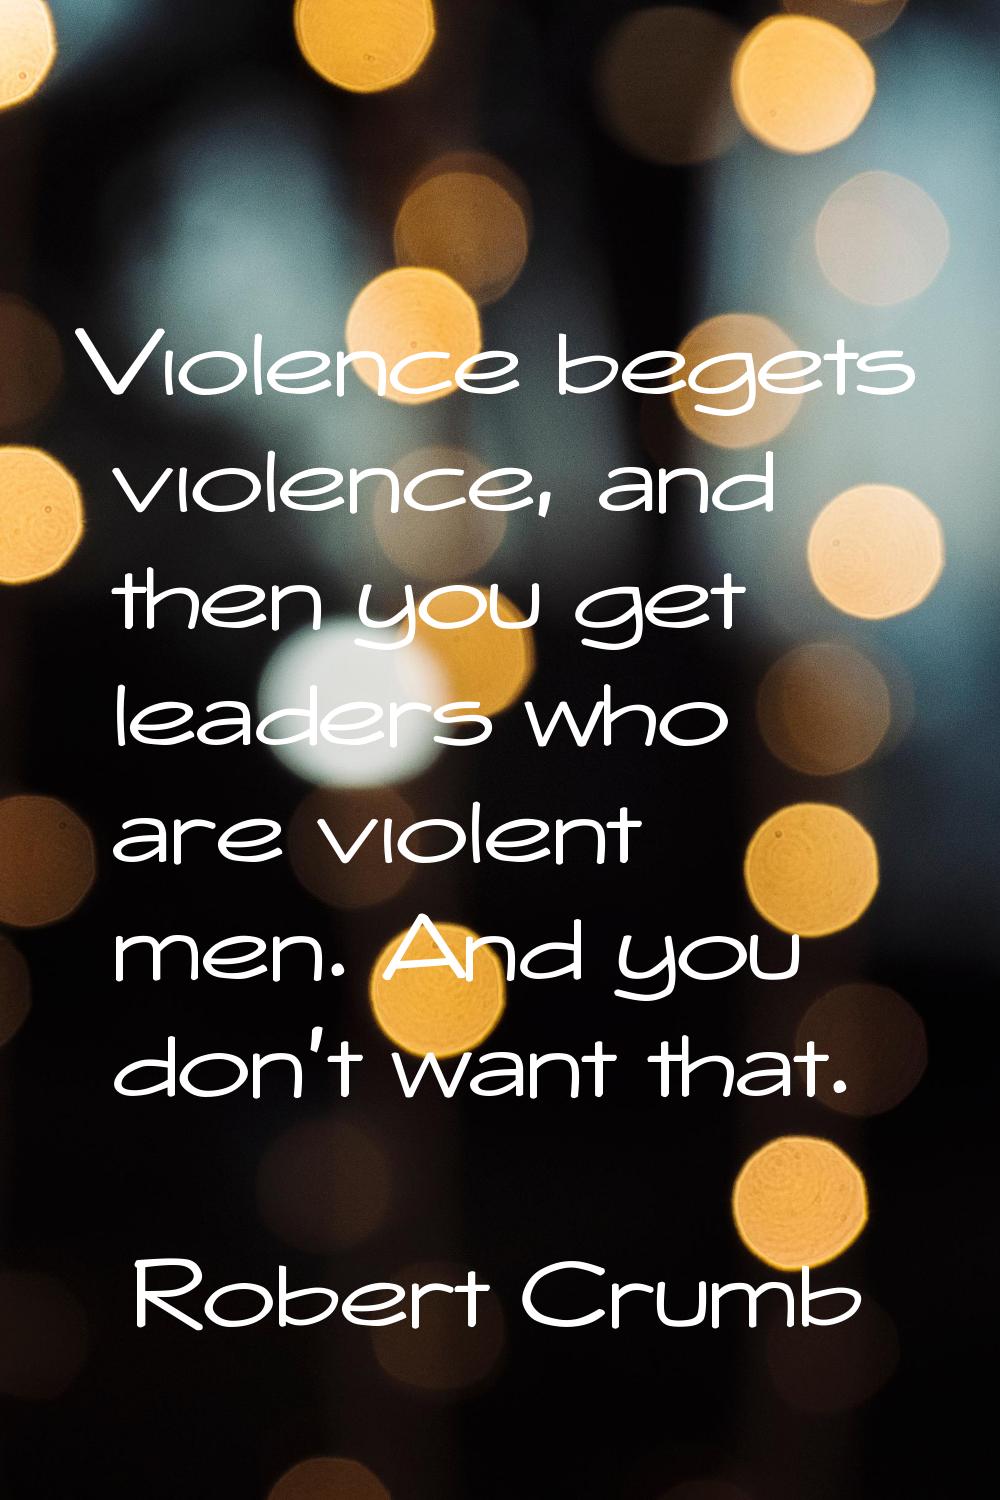 Violence begets violence, and then you get leaders who are violent men. And you don't want that.